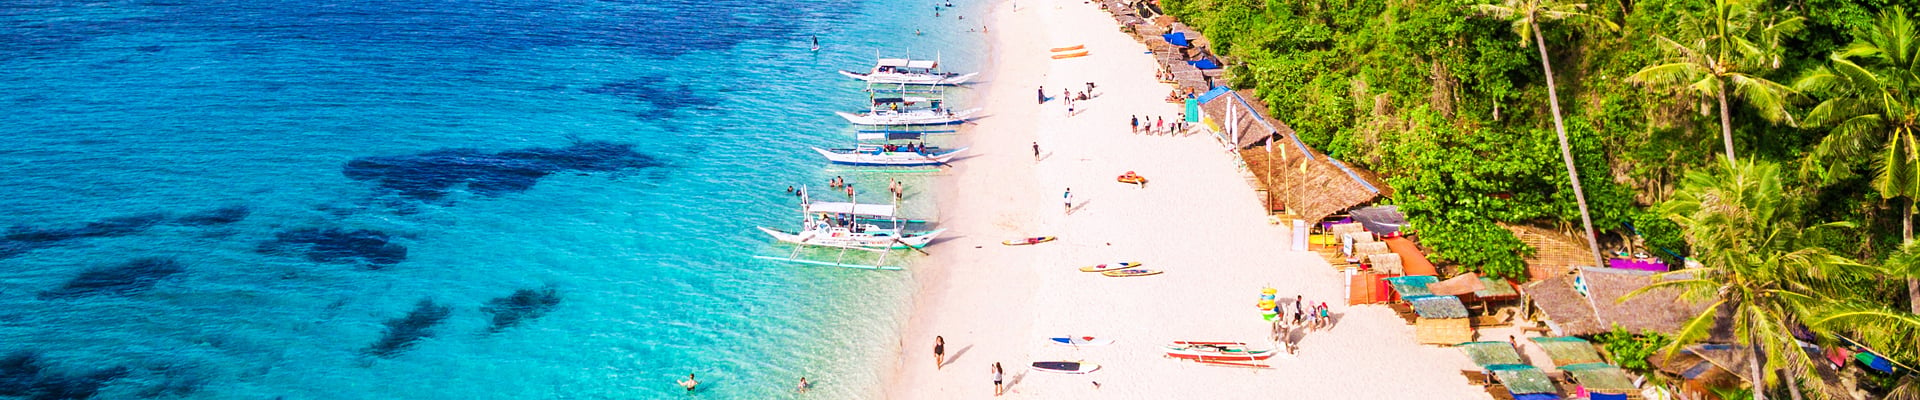 Borocay Island in The Philippines